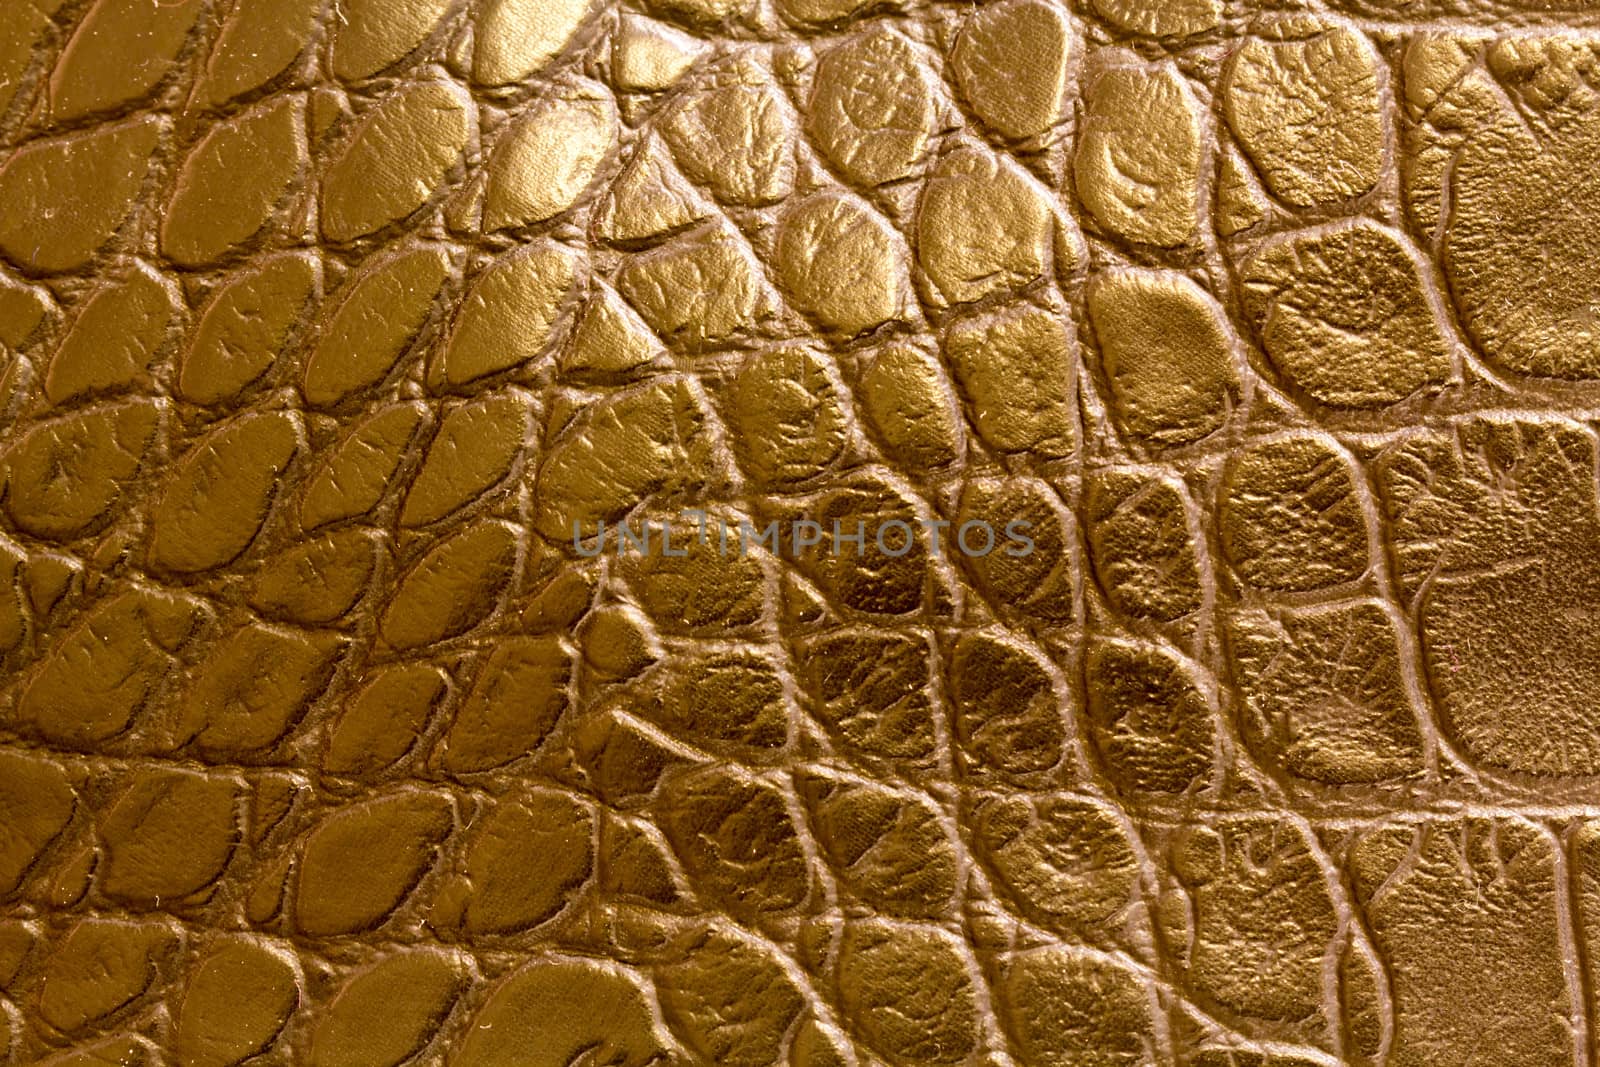 lookalike leather closeup by Stootsy